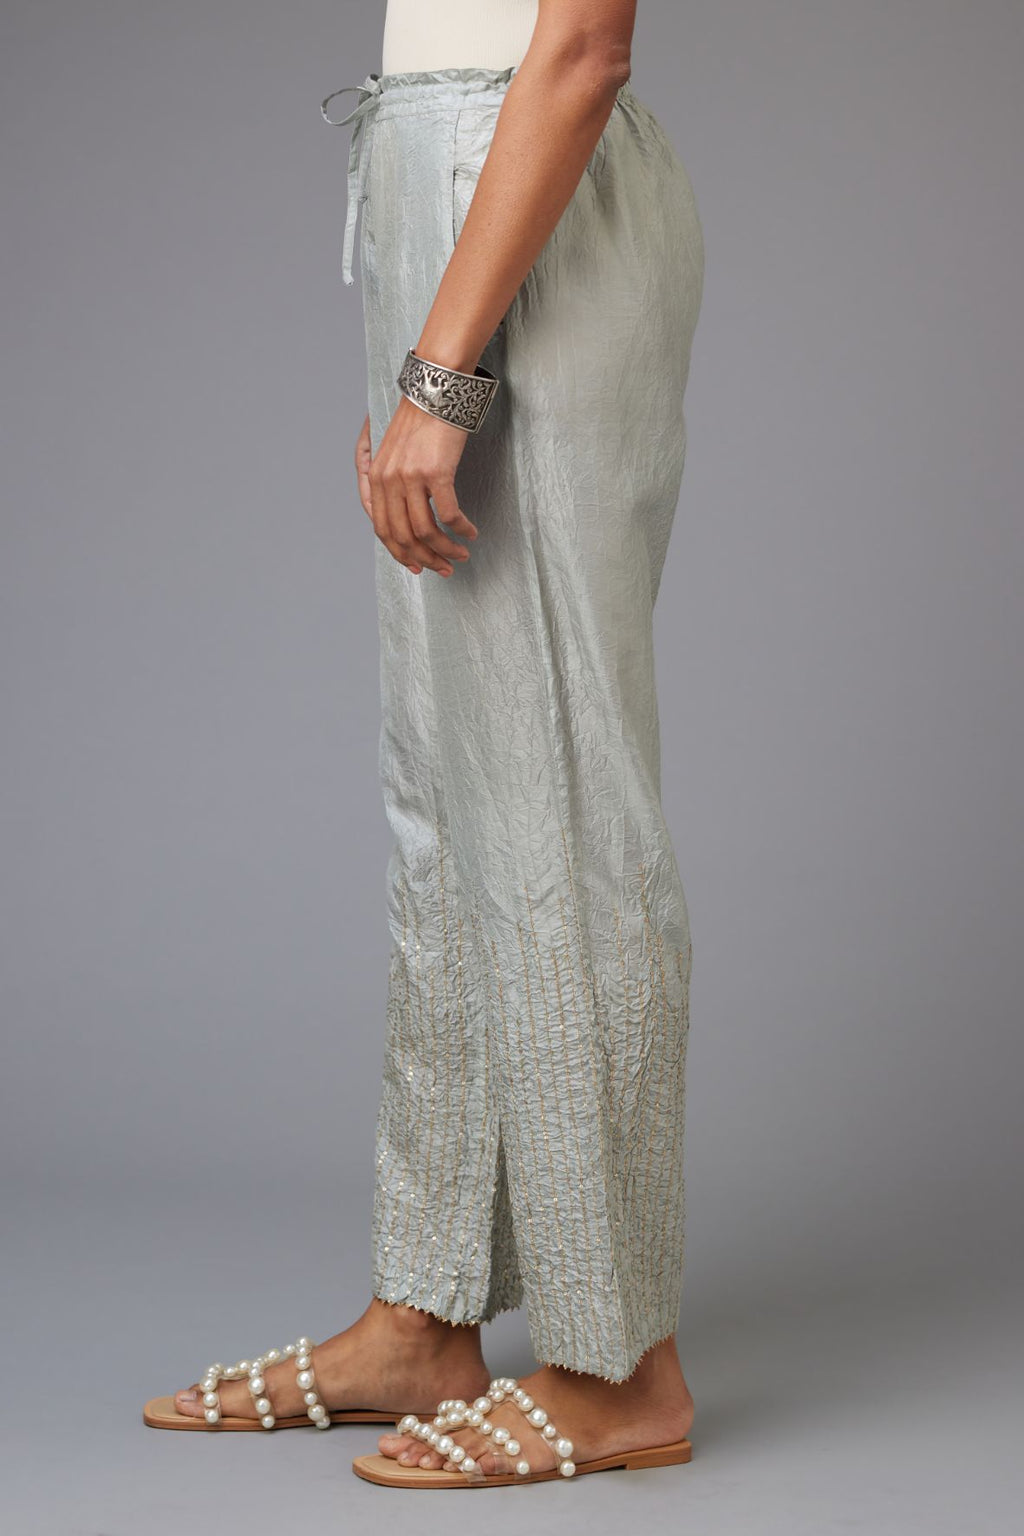 Blue hand crushed silk straight pants with golden sequin lines from calf to hem, highlighted with gota lace at edges.